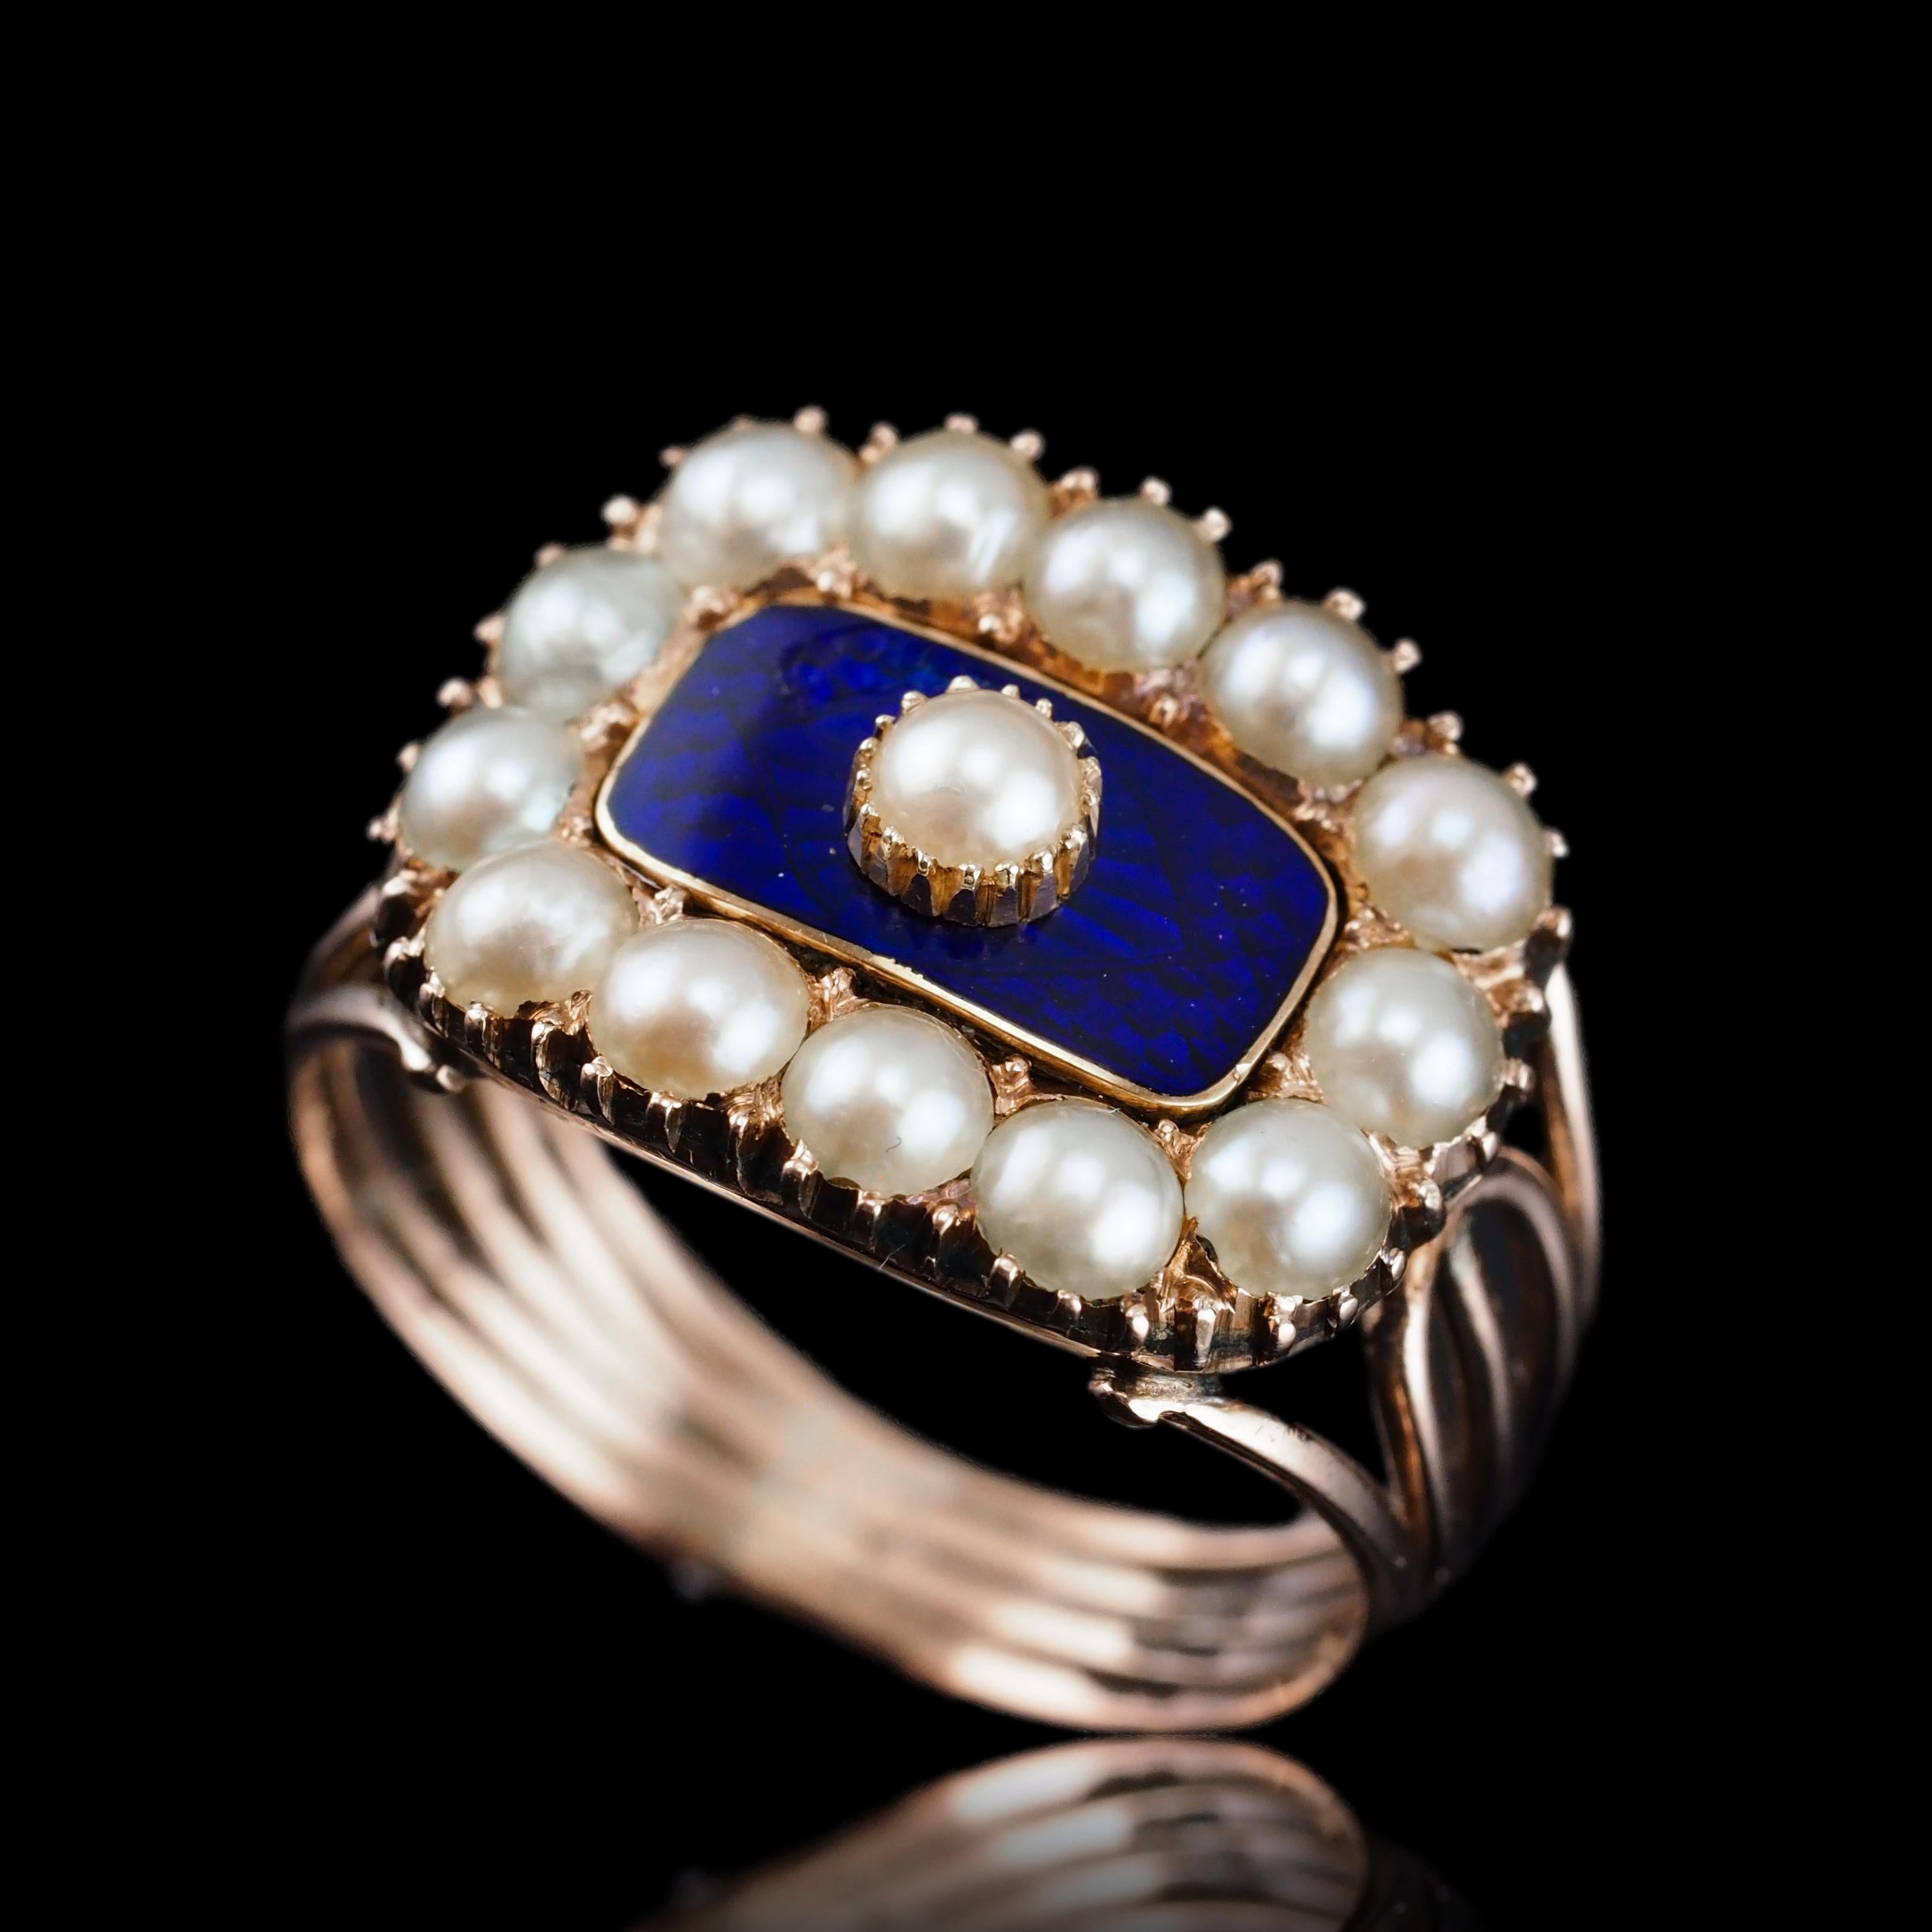 Antique Georgian Ring Blue Enamel & Seed Pearl 14K Gold - c.1800 In Fair Condition For Sale In London, GB